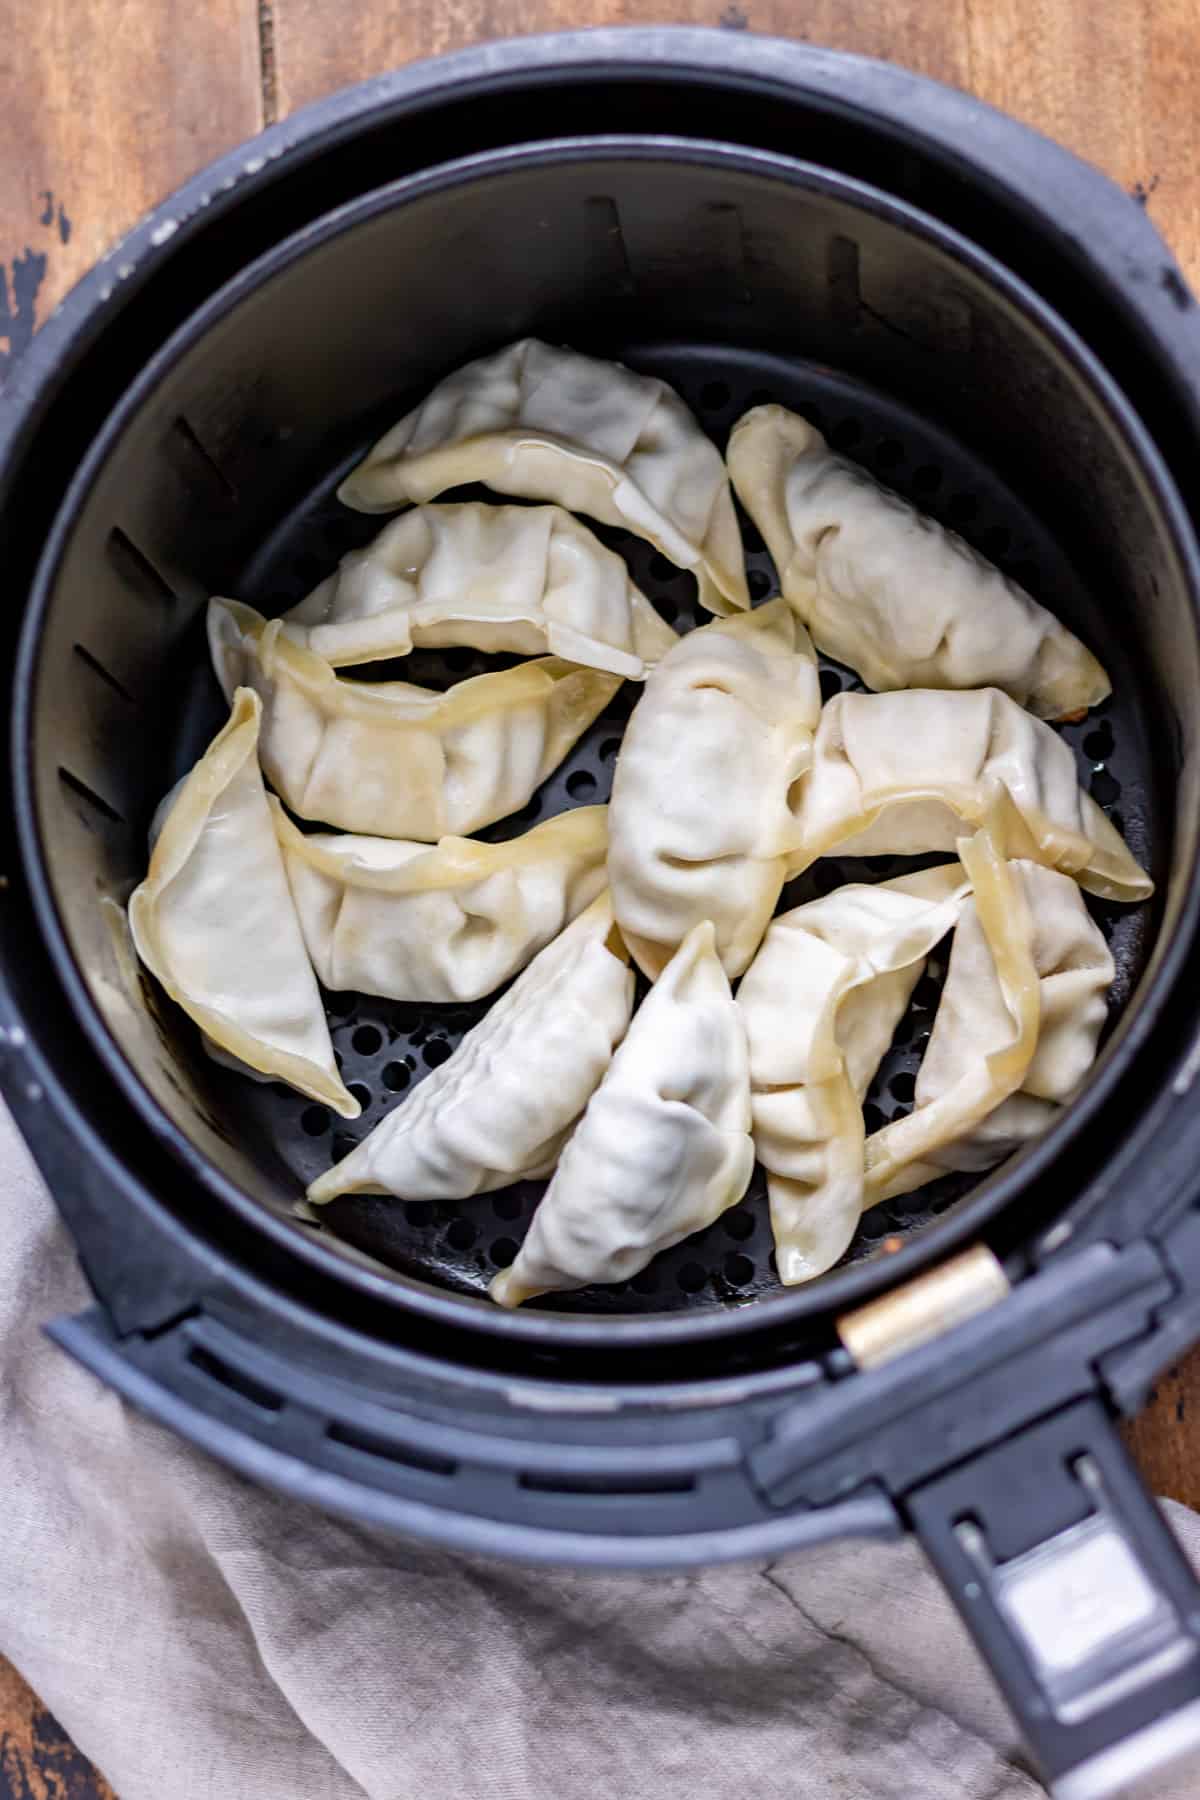 Potstickers added to the basket of the air fryer.